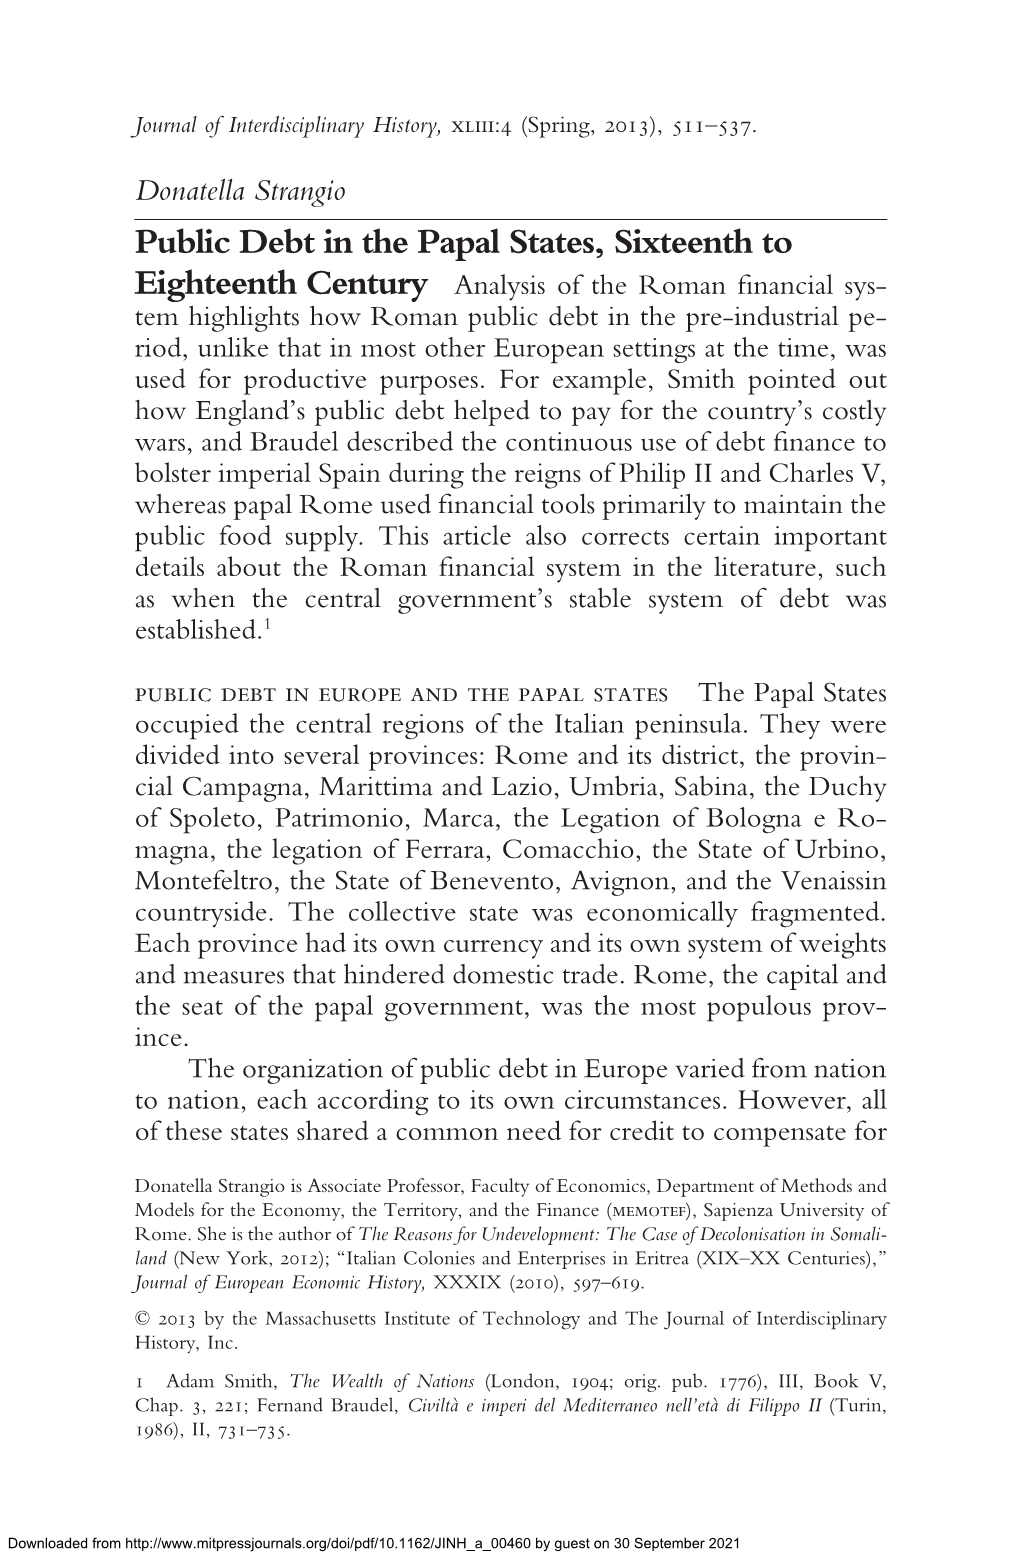 Public Debt in the Papal States, Sixteenth To